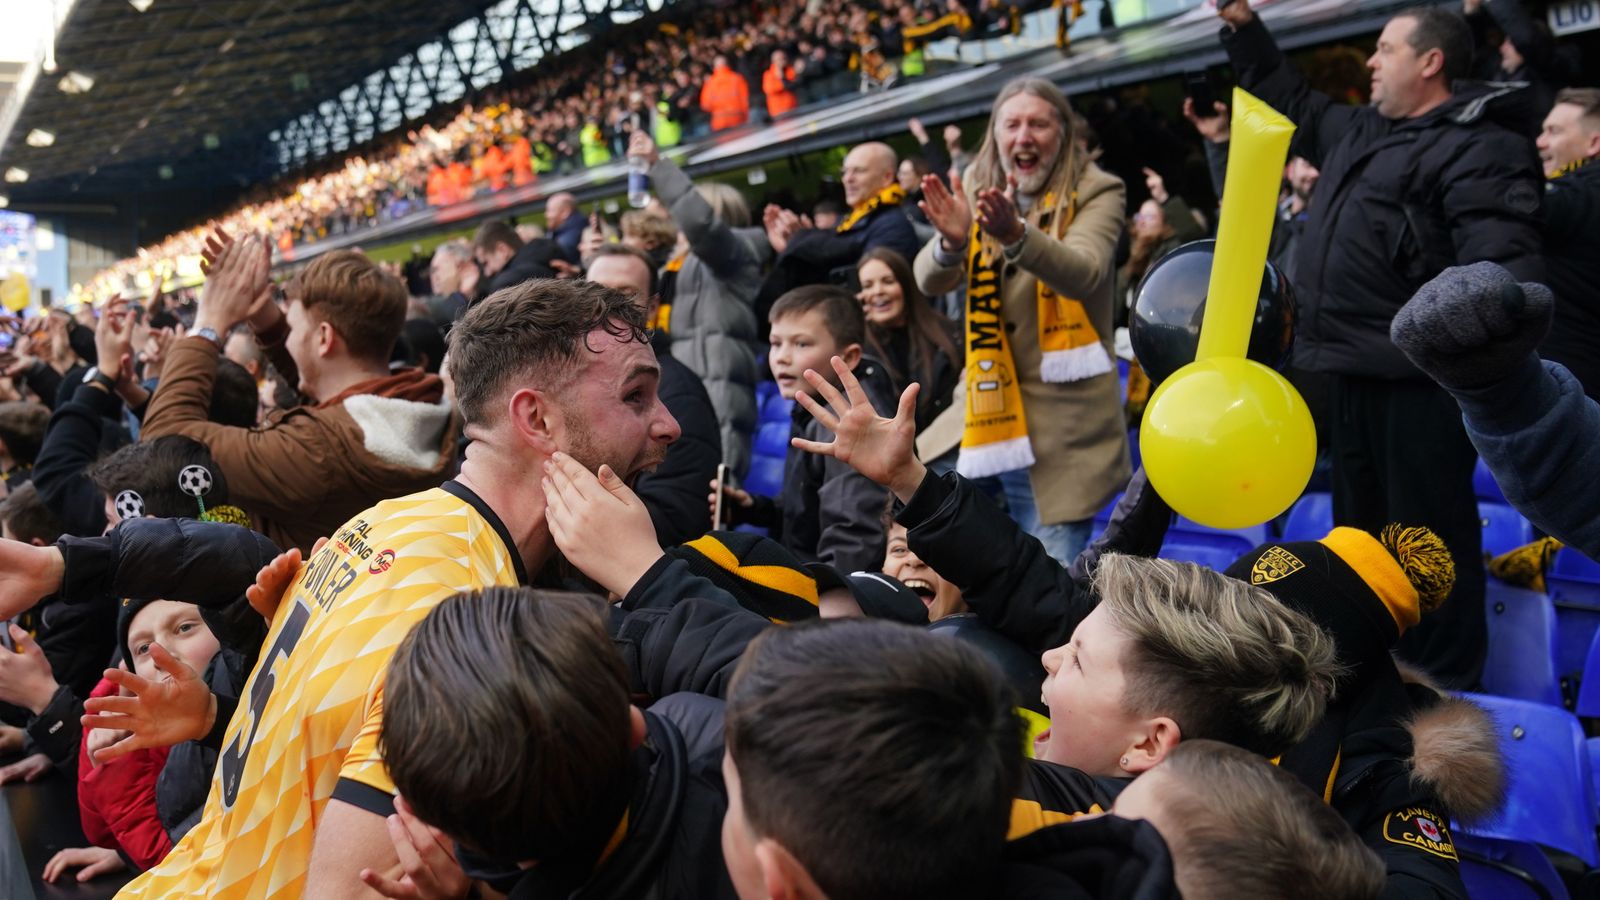 Non-League Maidstone United stun Ipswich Town in huge FA Cup upset